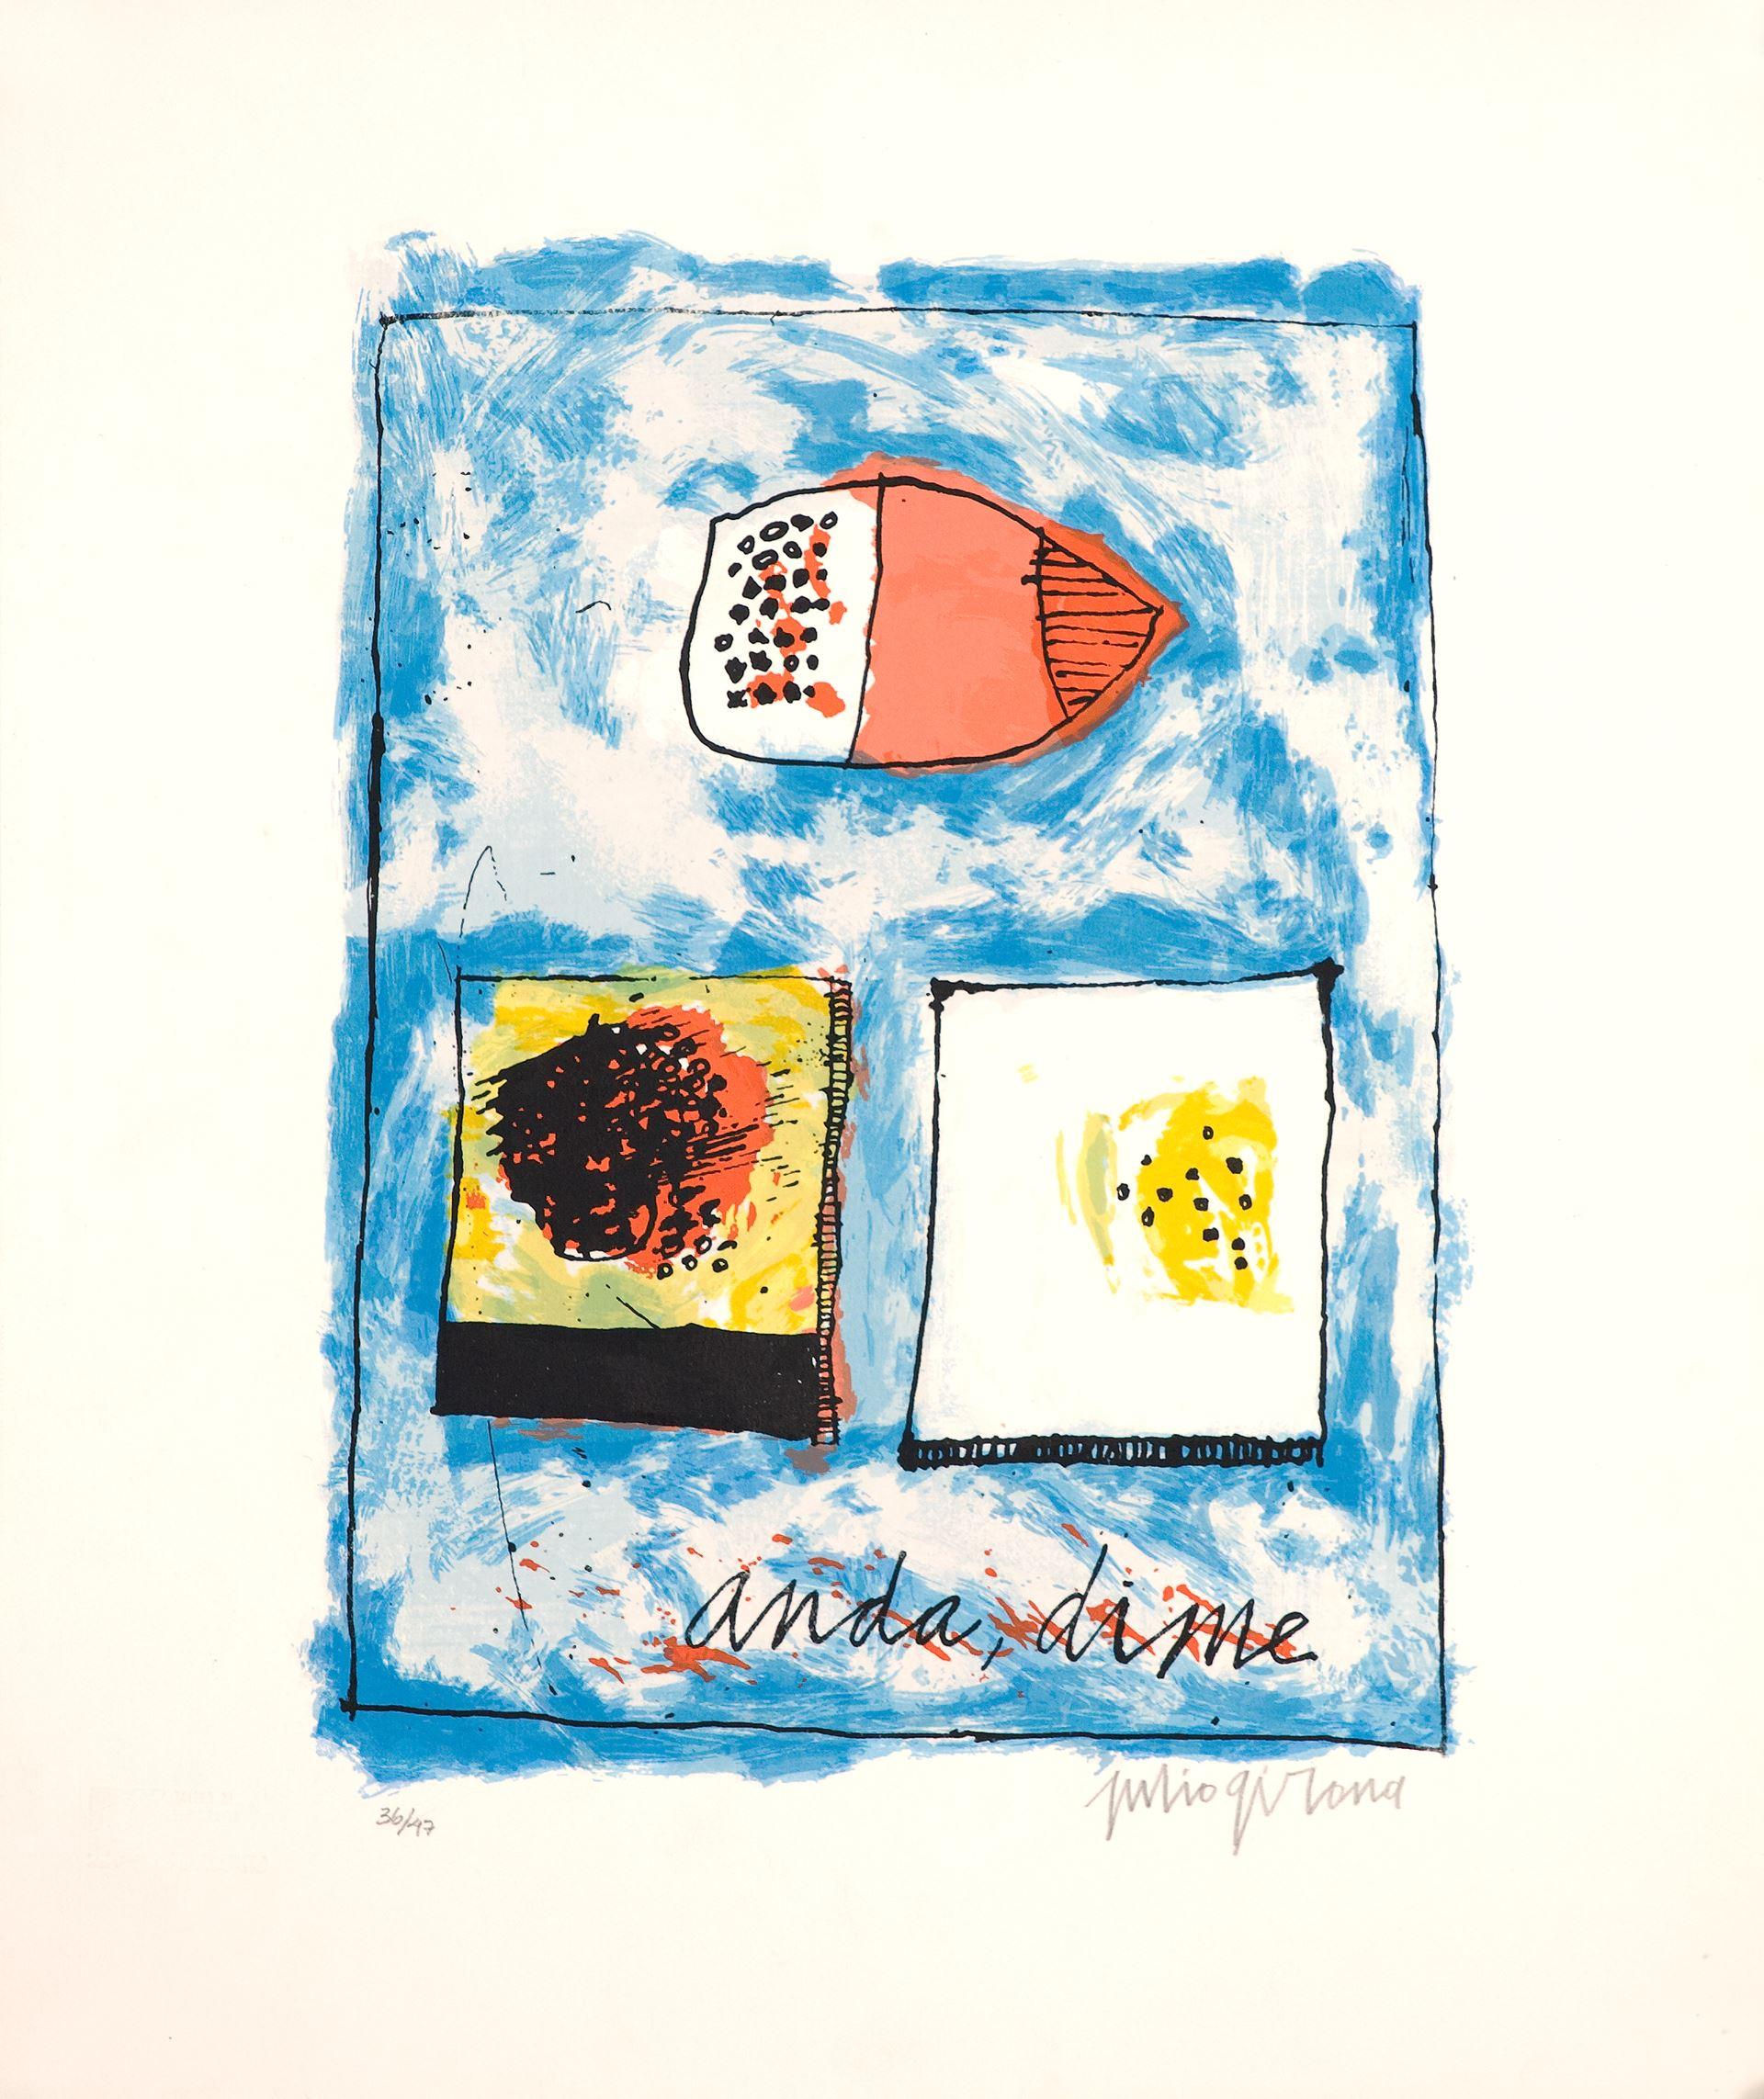 "Julio Girona (Cuba, 1914-2002)
'Anda, dime', 1999
silkscreen on paper
20.1 x 14.1 in. (50.8 x 35.6 cm.)
Edition of 47
ID: GIR1066-004-047"

"Julio Girona is a Cuban artist who has worked in various media, including painting, drawing, printmaking,